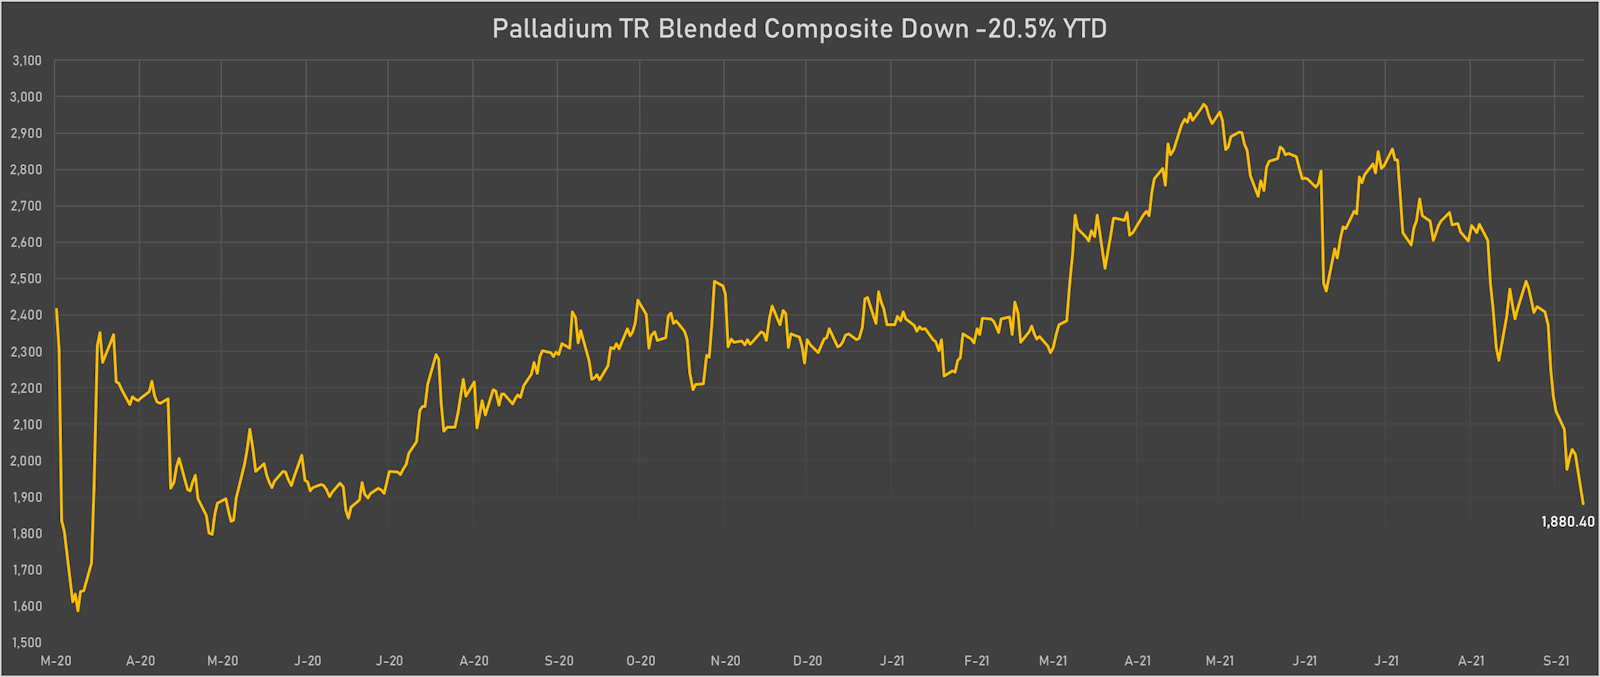 Palladium Has Struggled Recently With The Drop In Industrial Metals | Sources: ϕpost, Refinitiv data